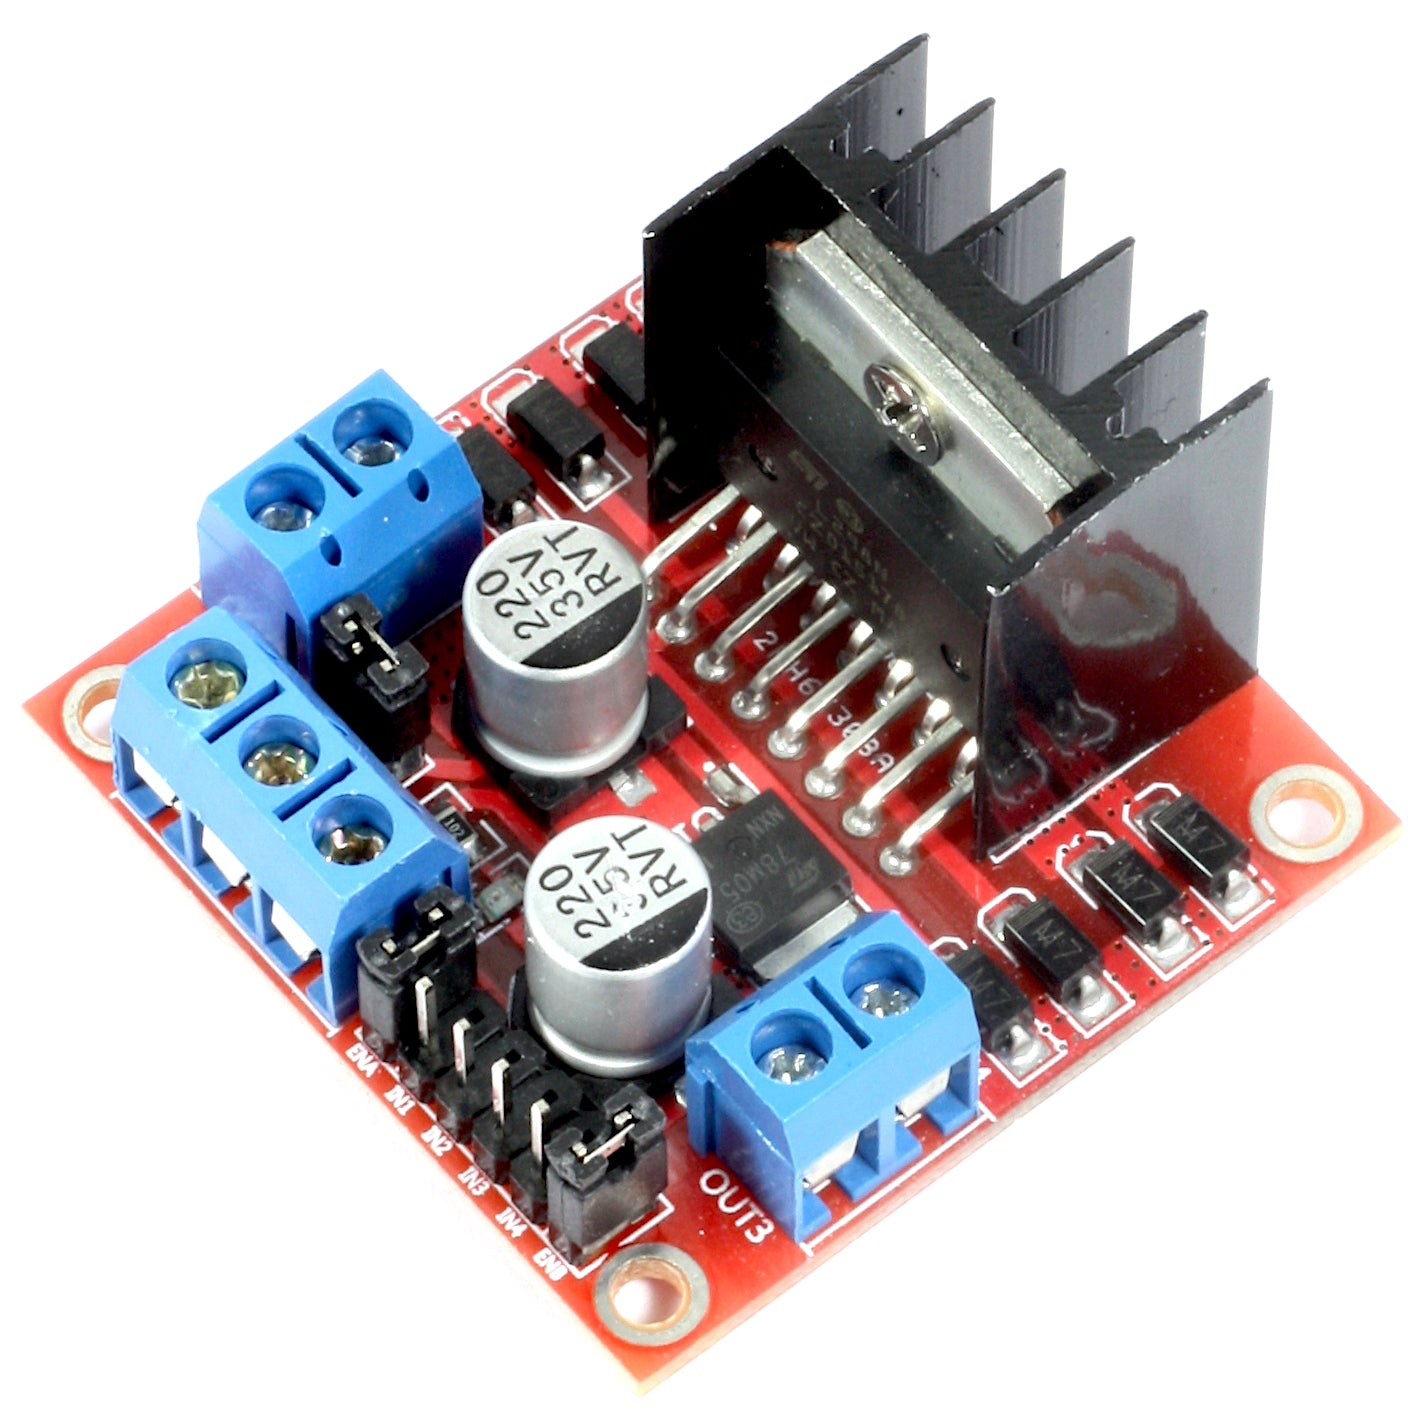 Motor Driver Module with L298N for DC and Stepper Motors